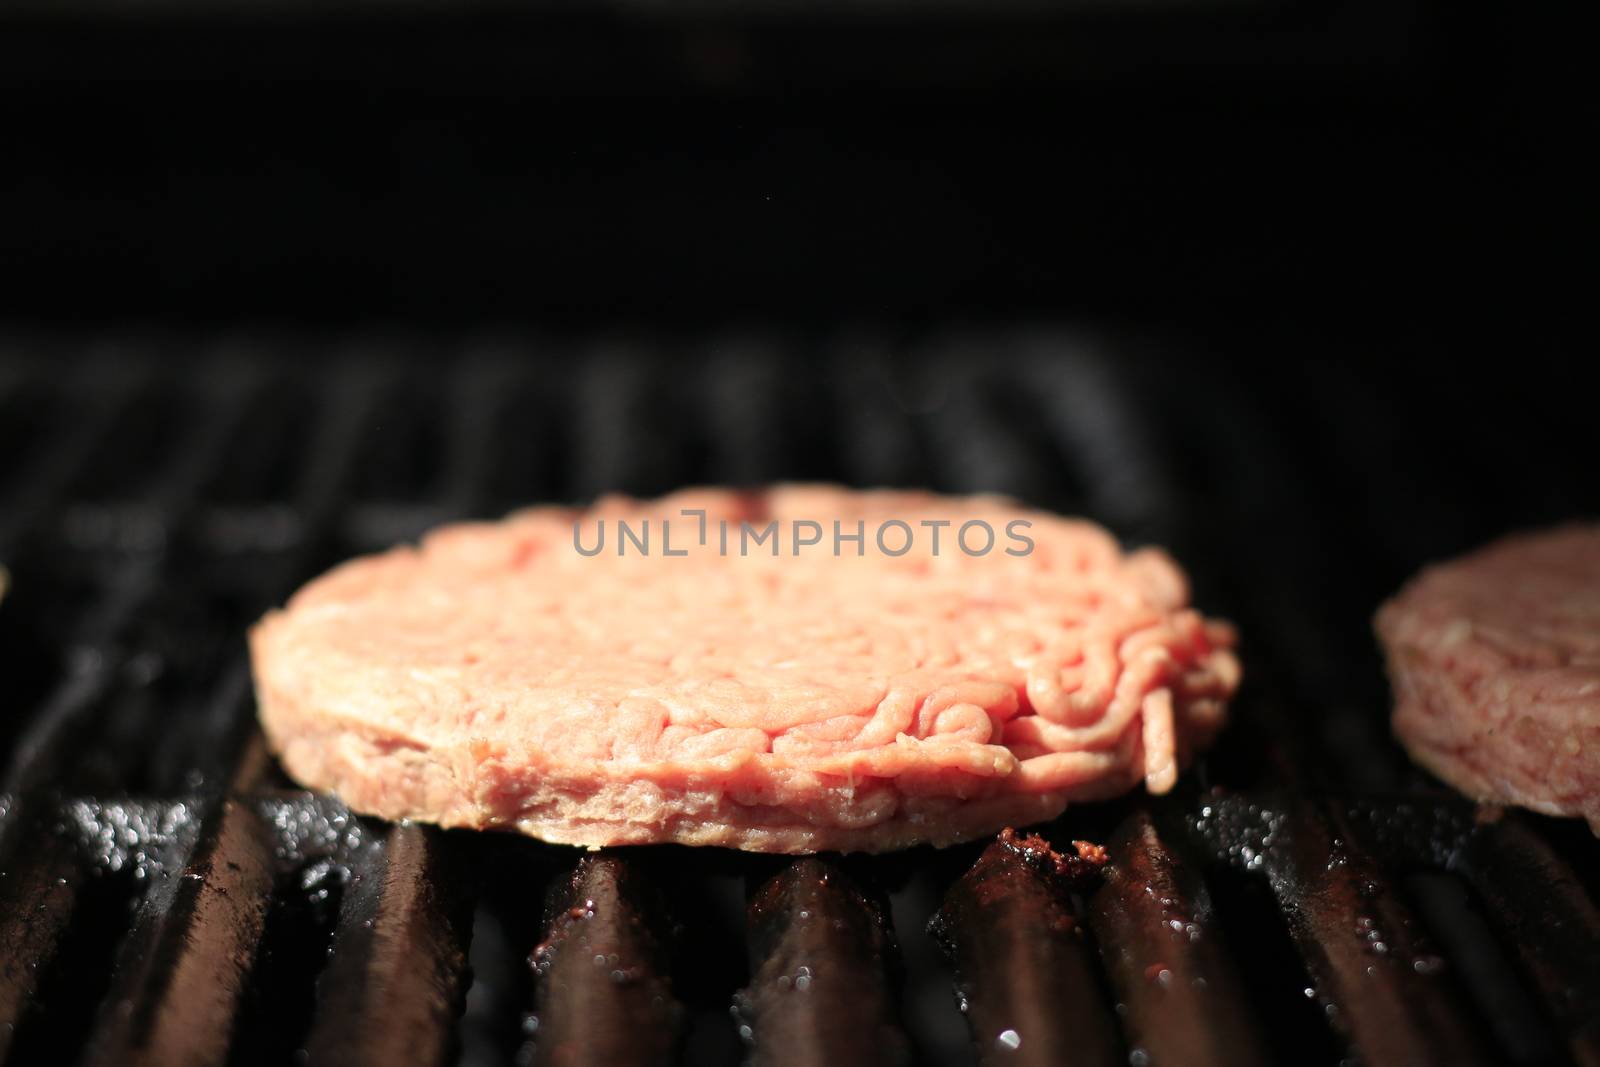 Raw burgers on bbq barbecue grill with fire. Food meat - raw burgers on bbq barbecue grill with fire. Shallow dof by mynewturtle1